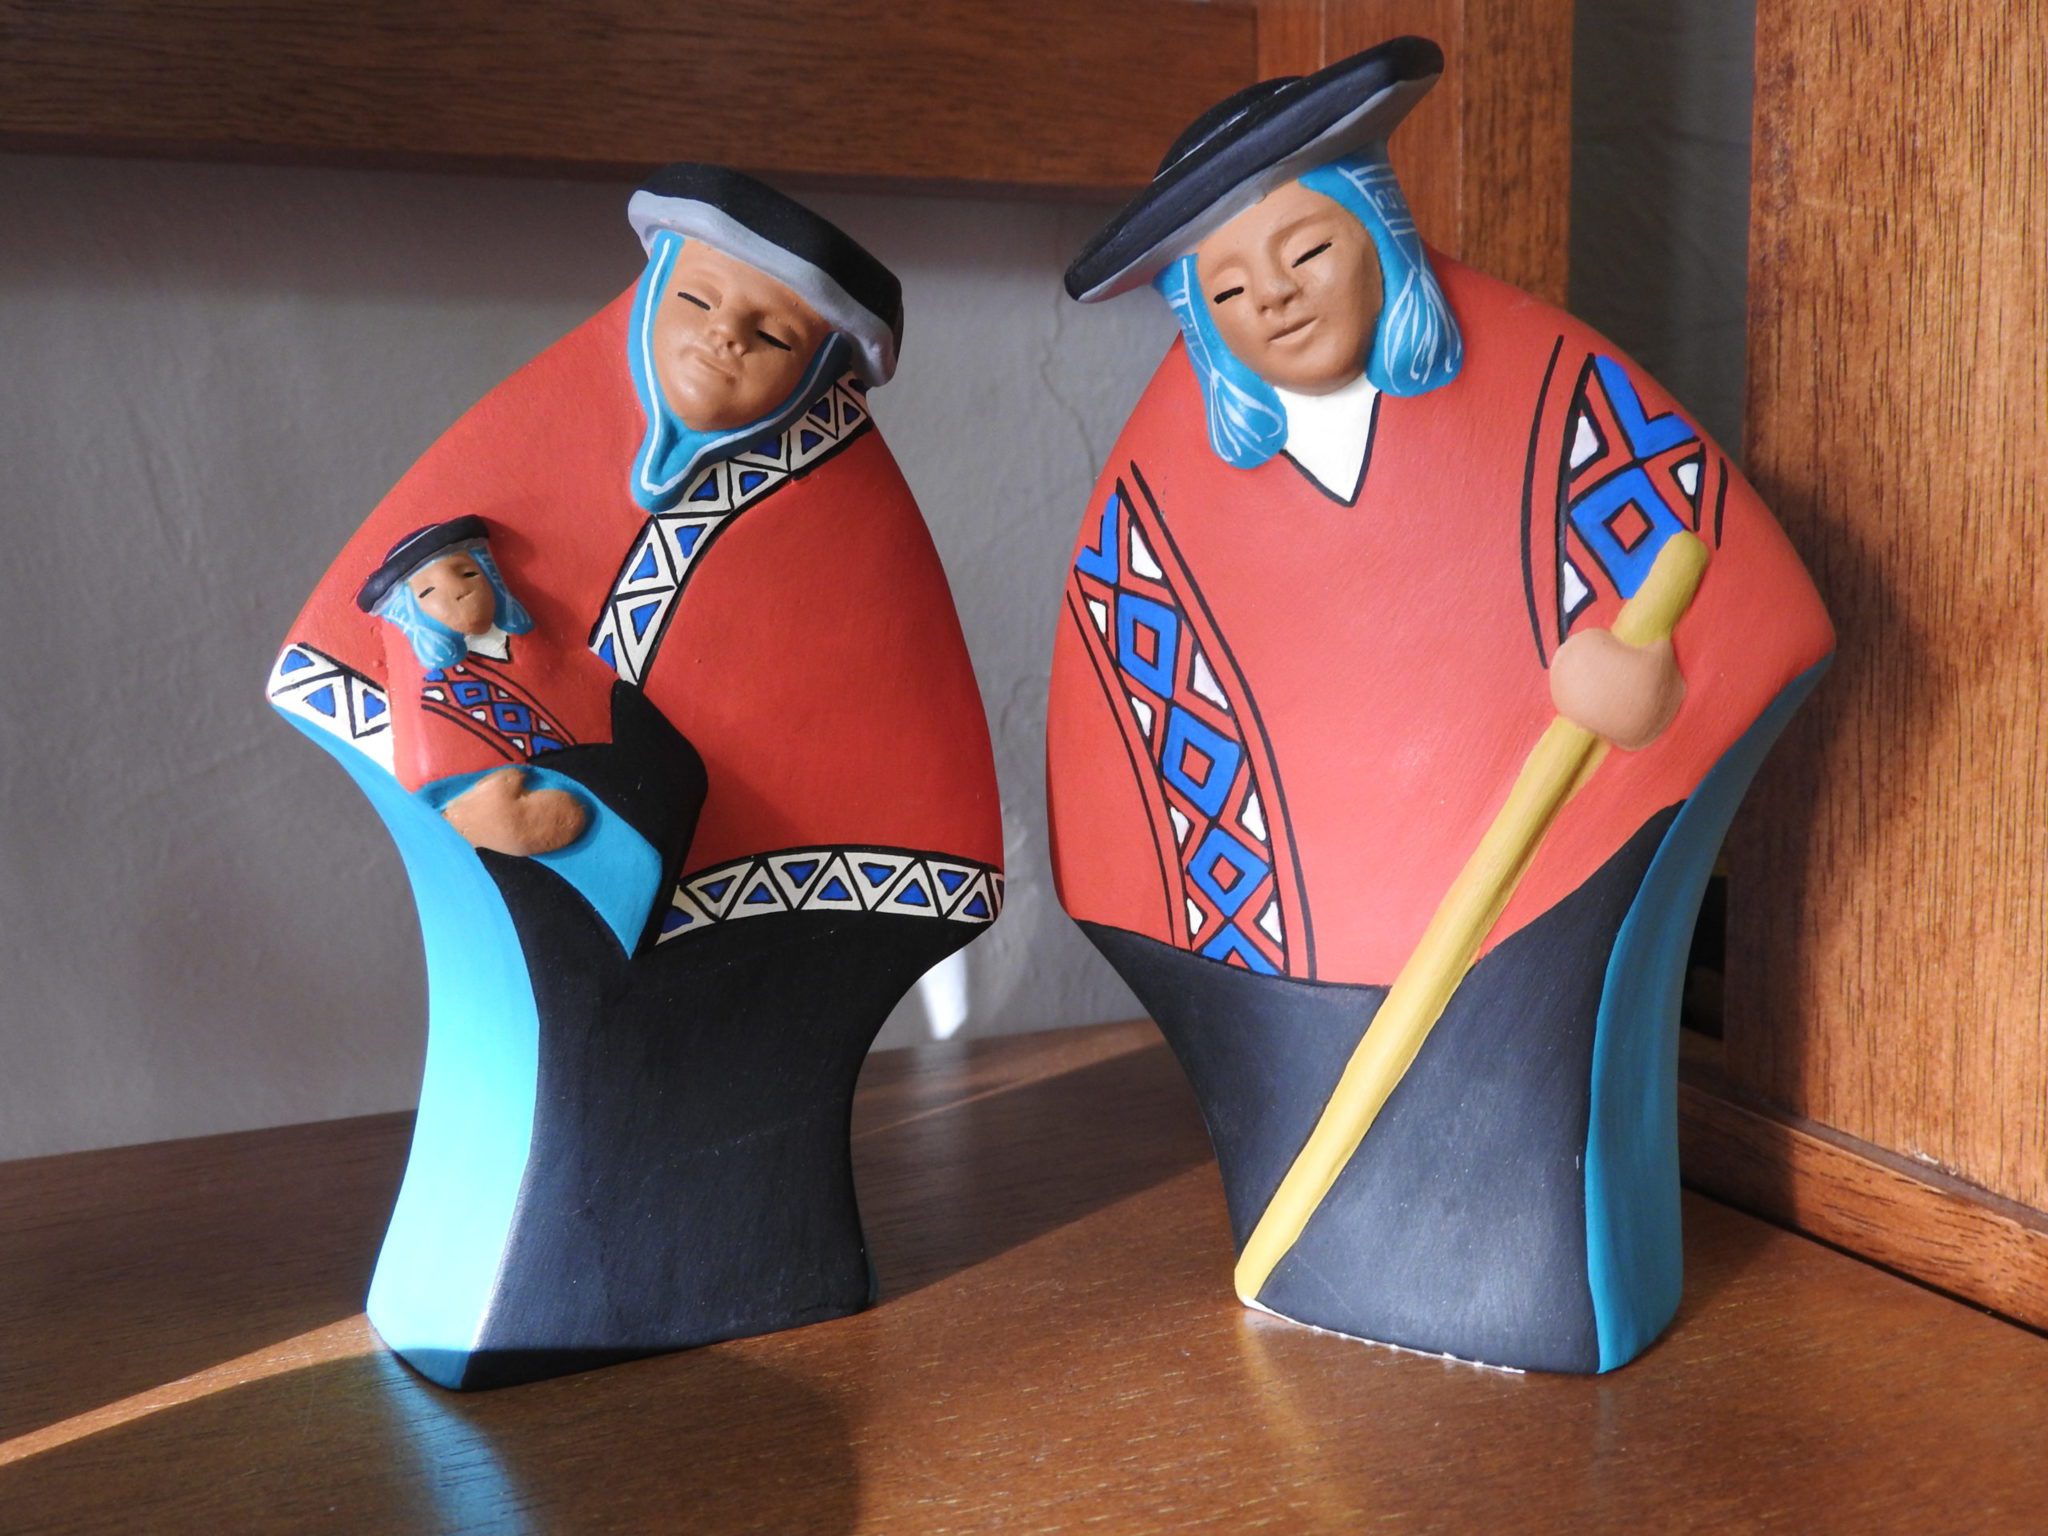 One of many Nativities available at the Market – this one from Peru